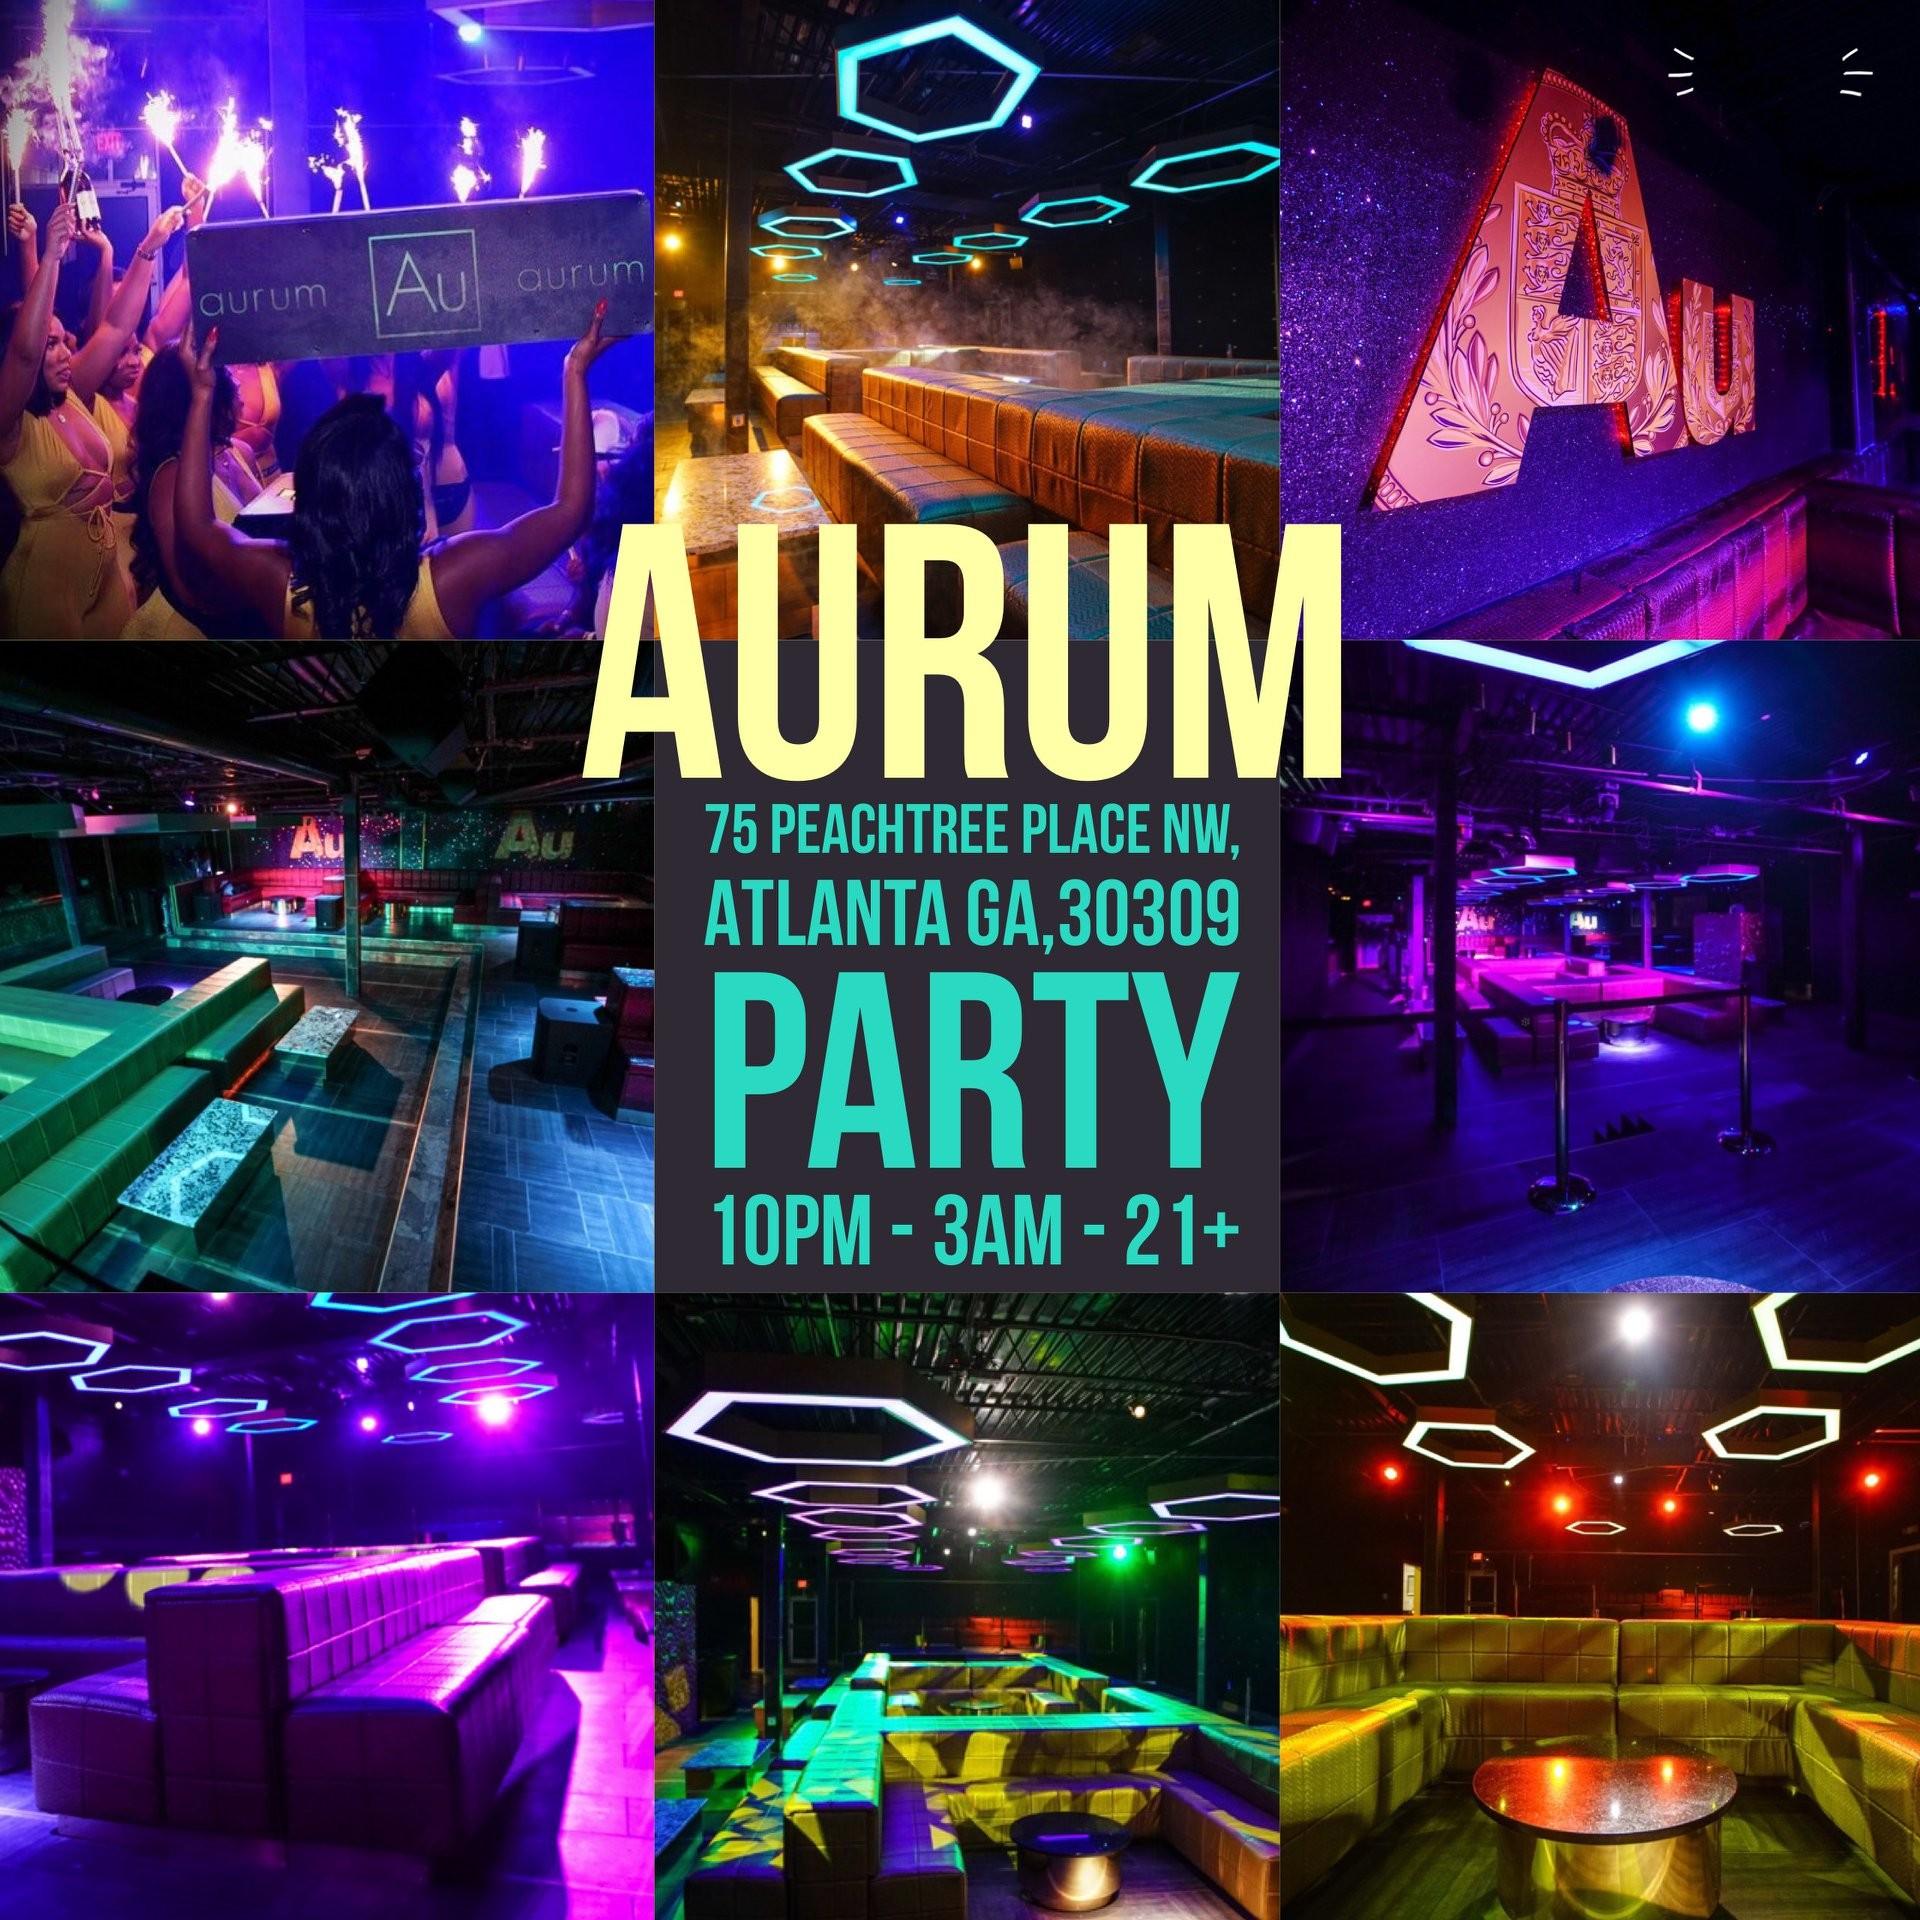 FREE BIRTHDAY PARTY w/ FREE TABLE & BOTTLE! Every Saturday @ AURUM LOUNGE!